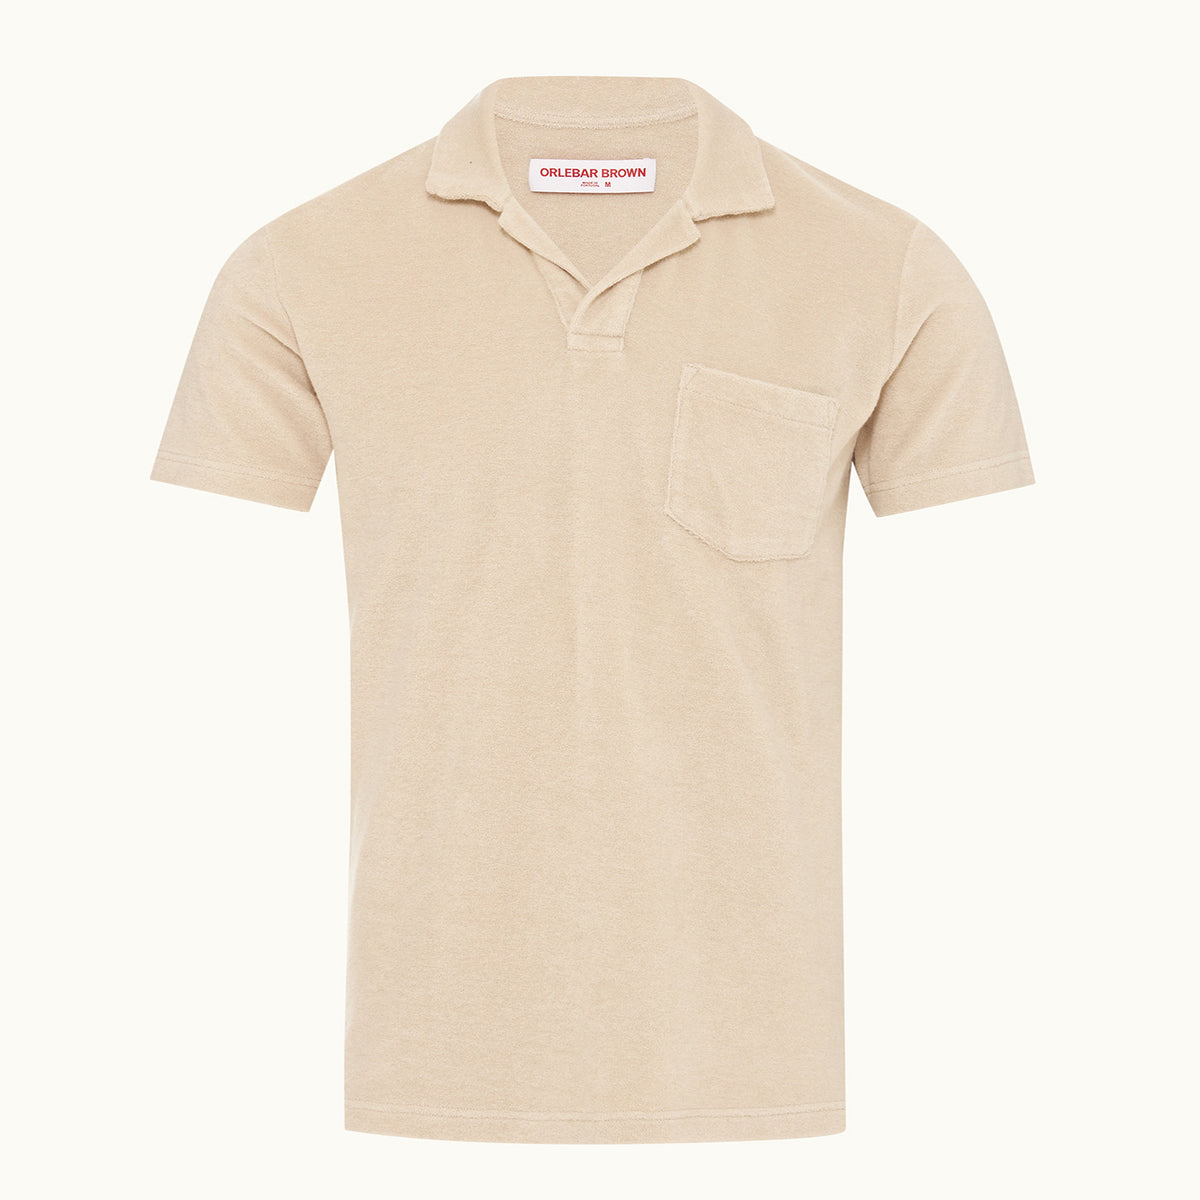 James Bond Taupe Towelling Polo Shirt - By Orlebar Brown